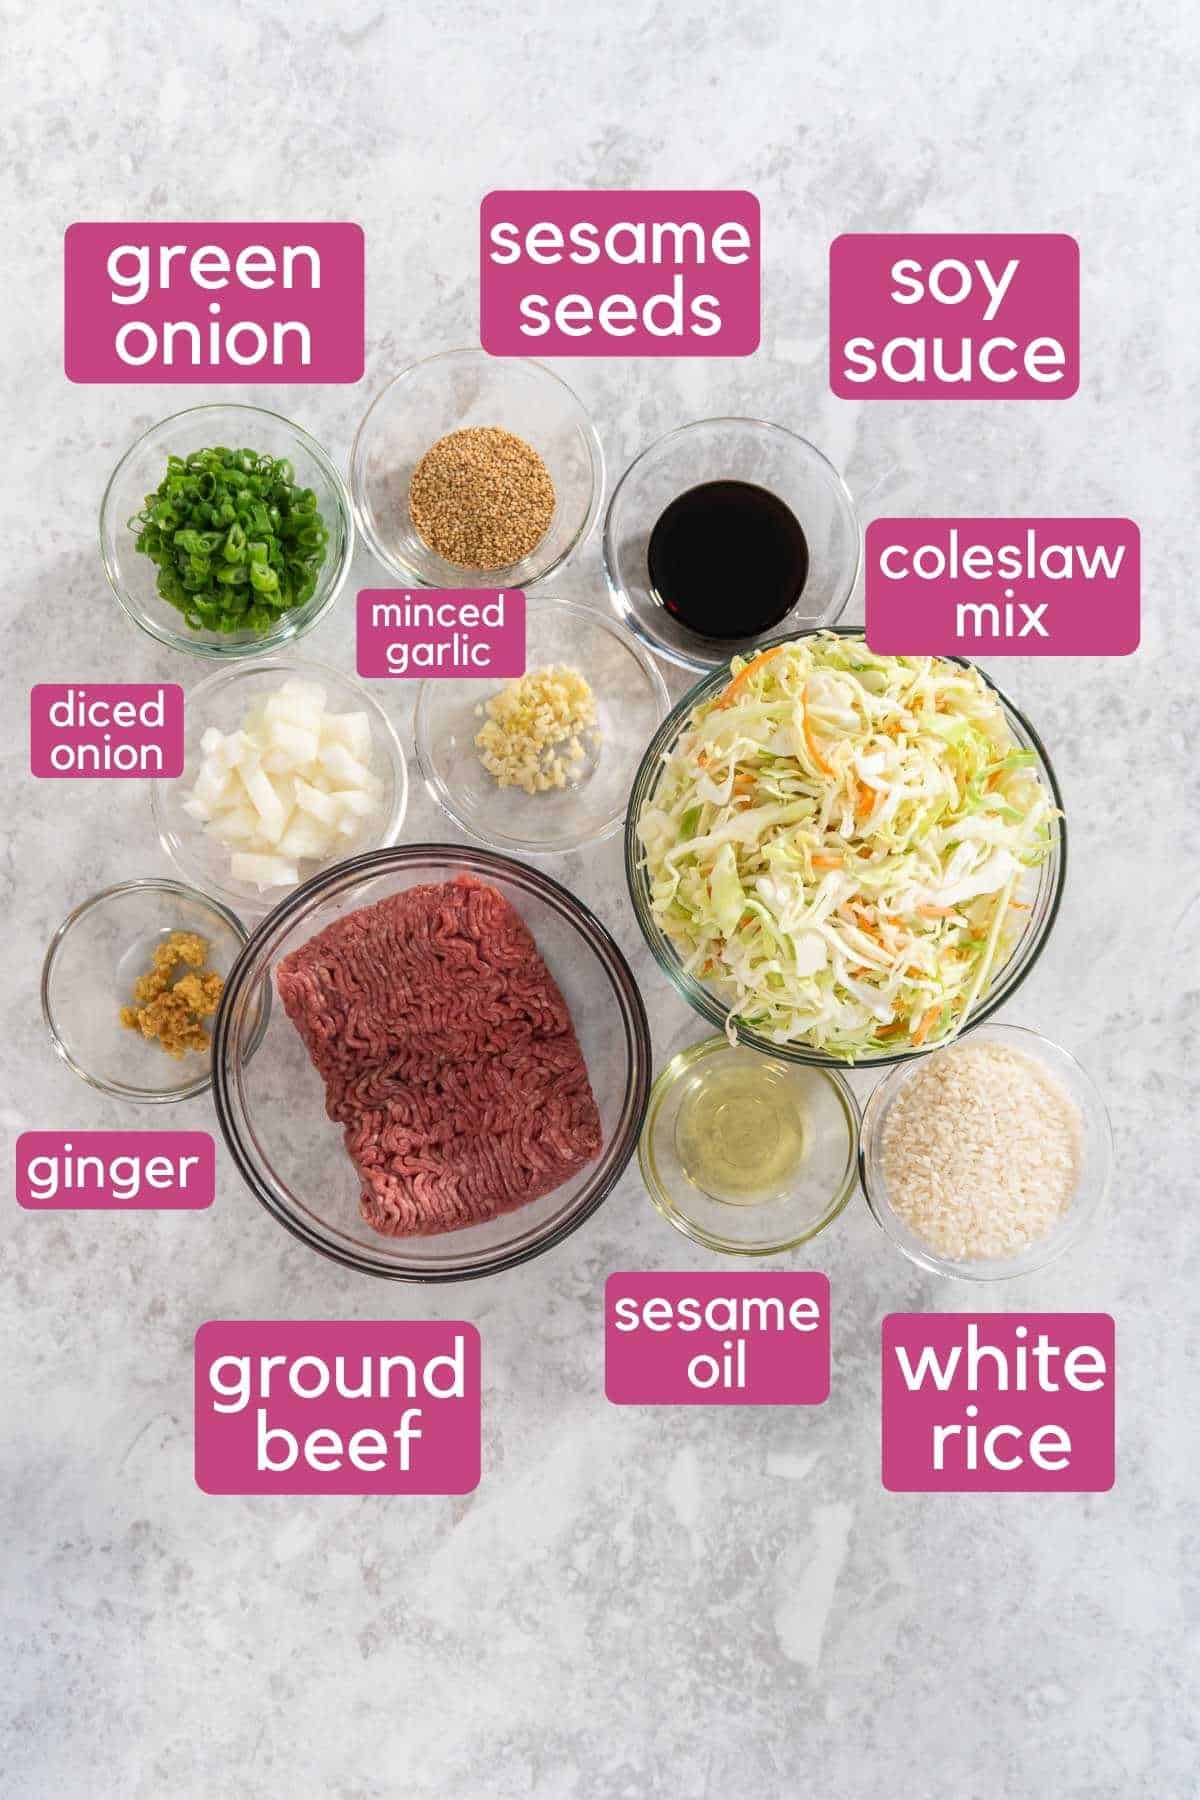 The ingredients needed to make a beef and cabbage bowl.